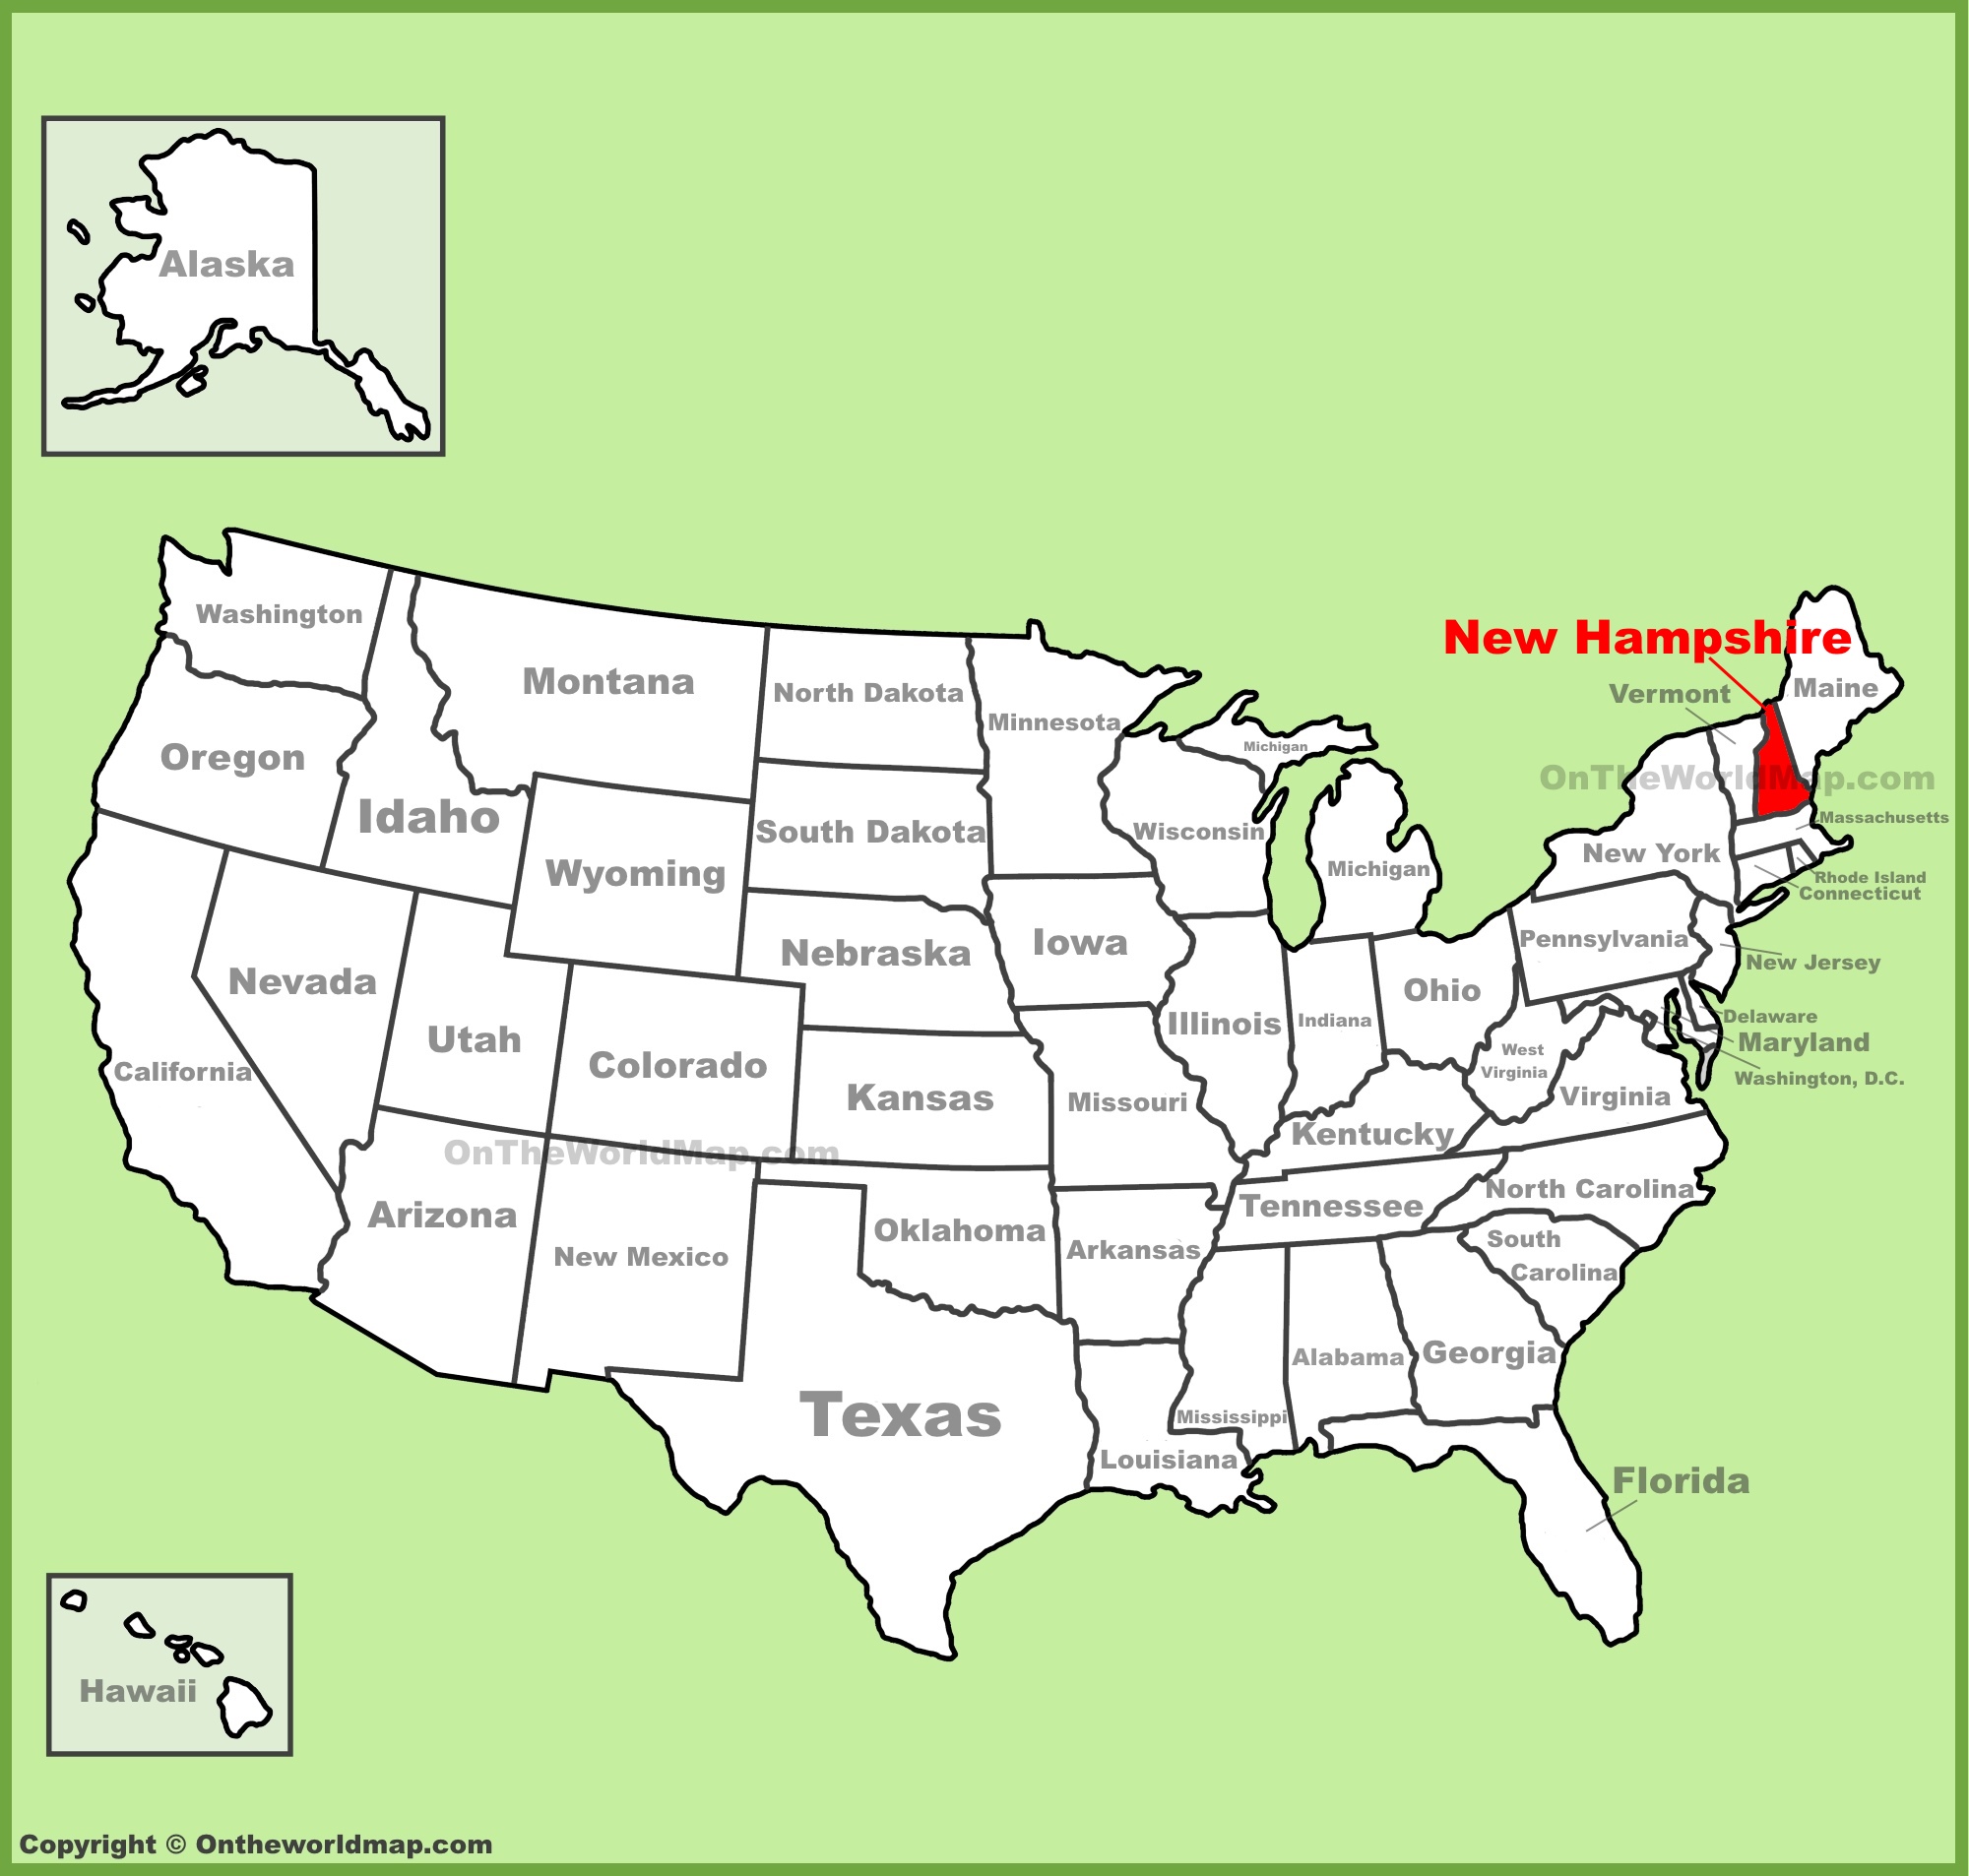 New Hampshire Location On The U S Map